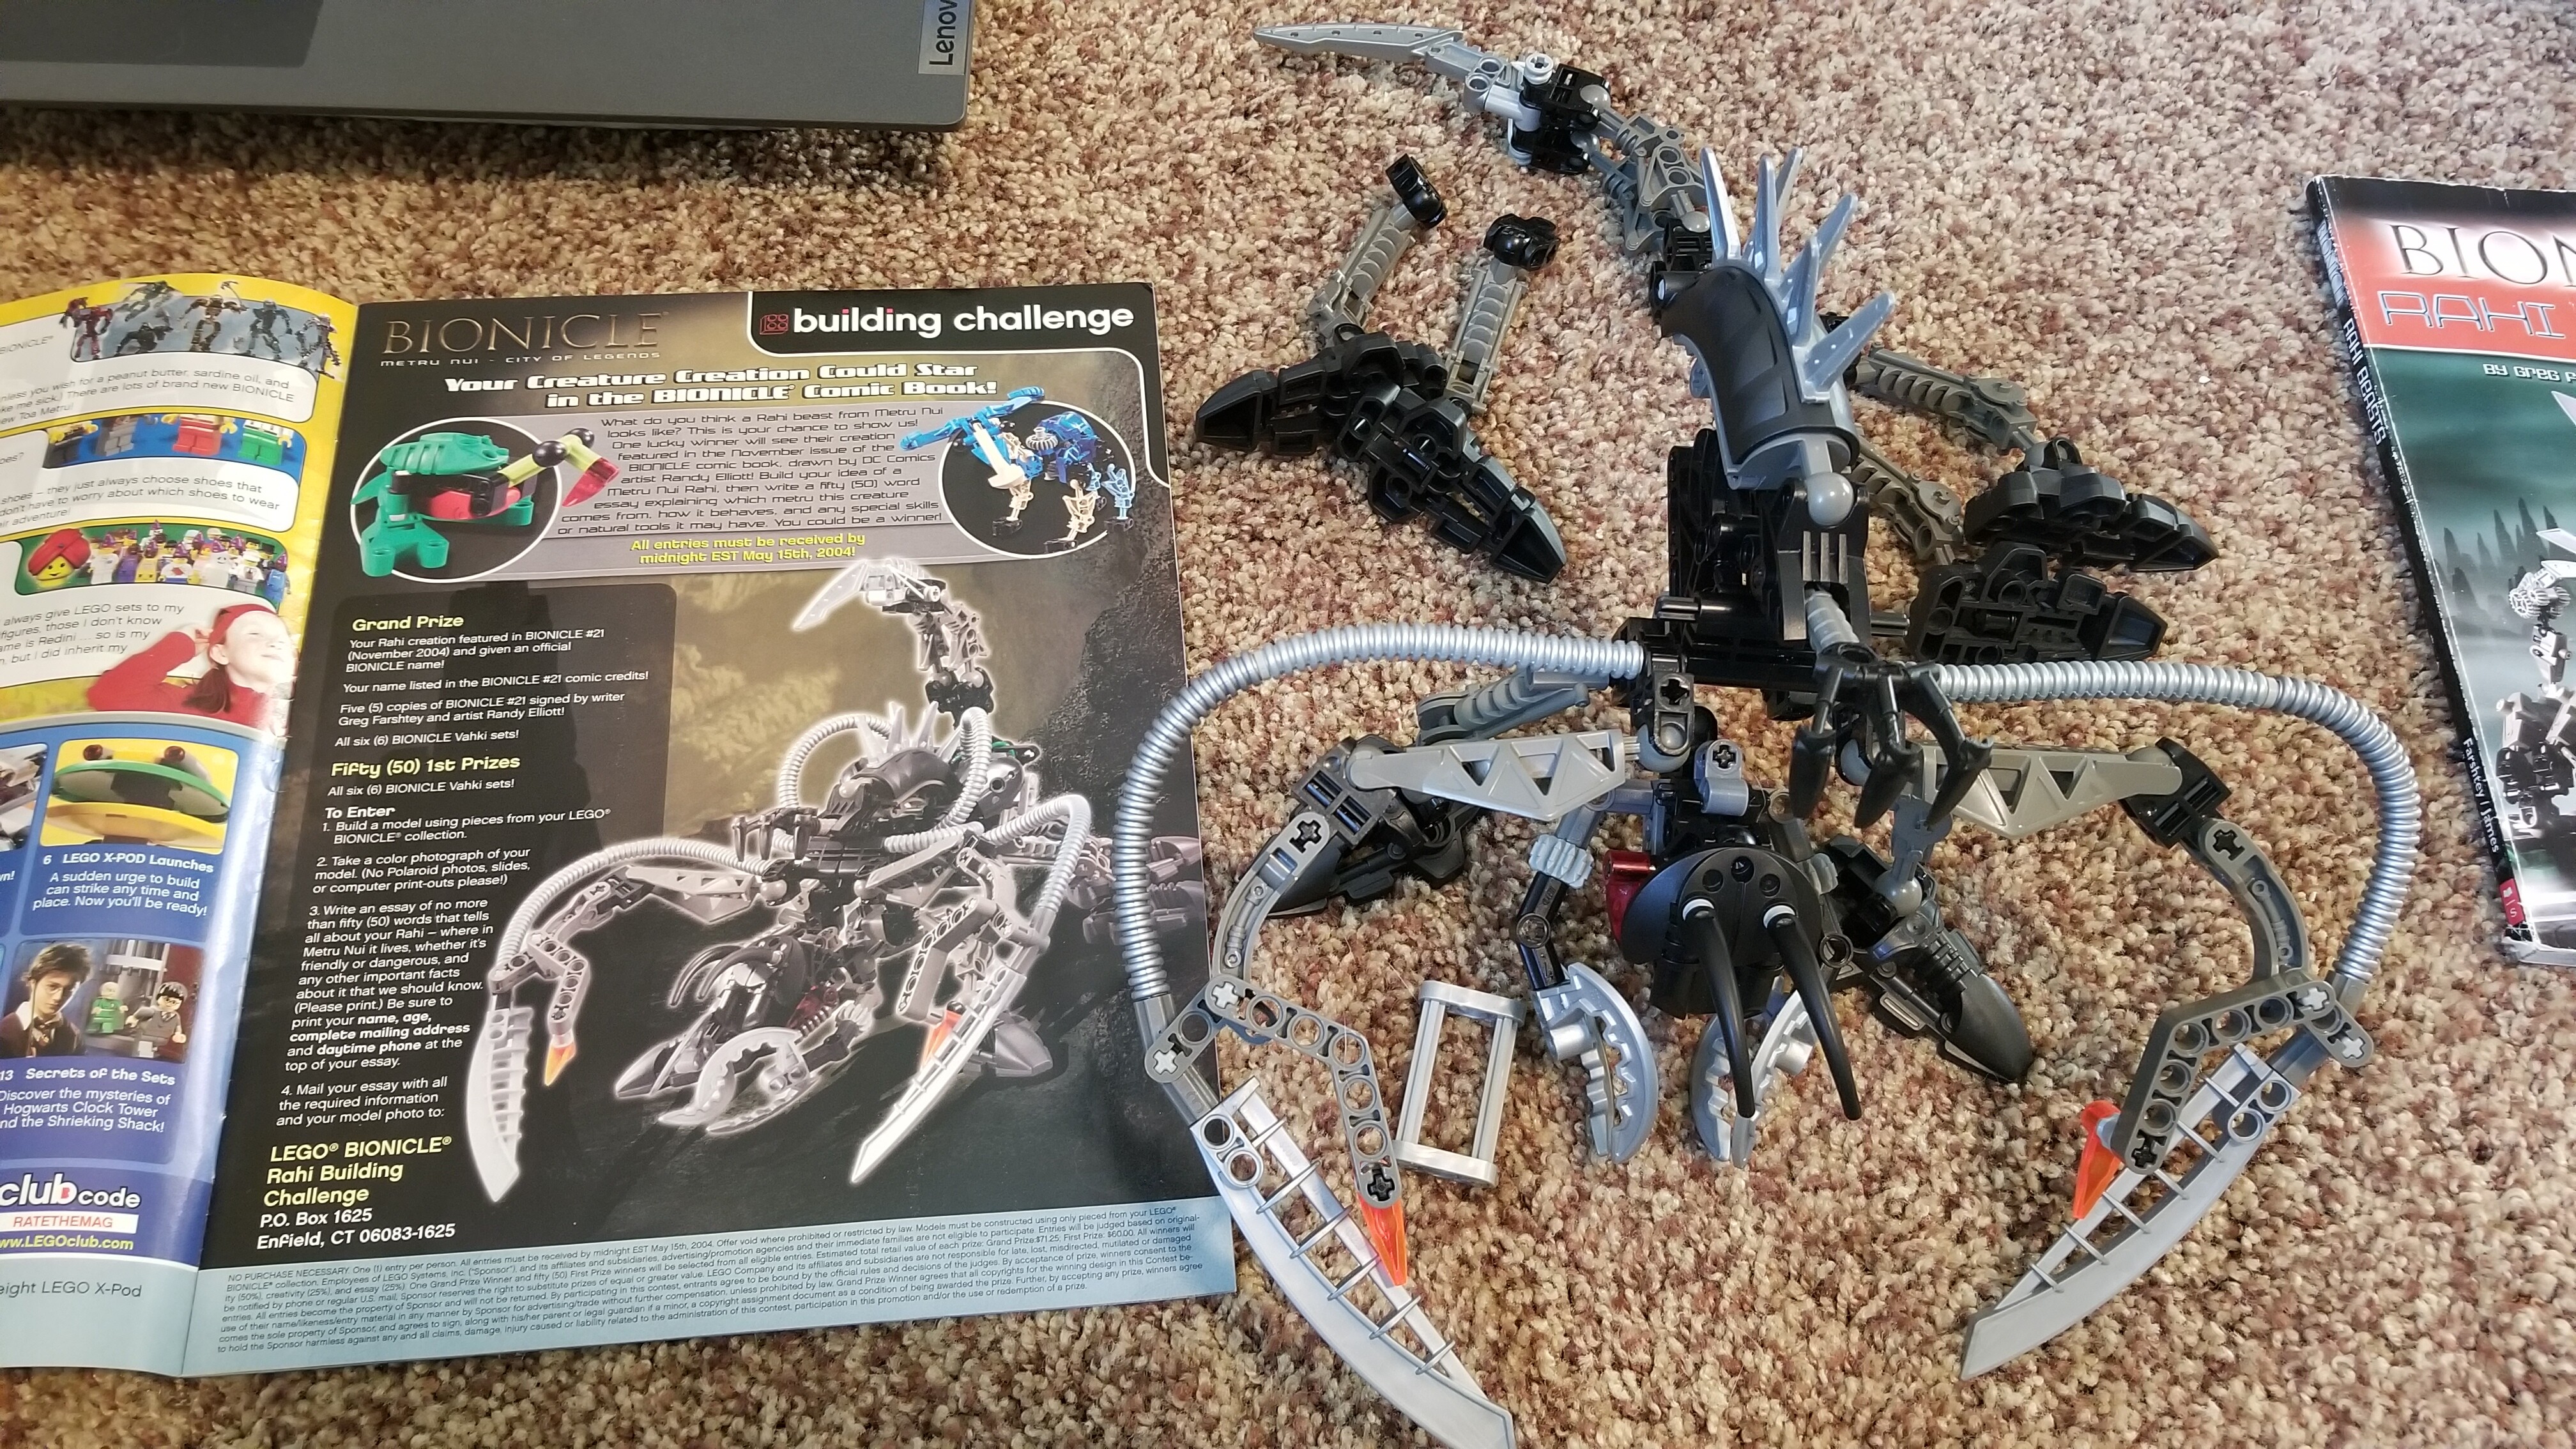 I created Gadeirus out of Lego Bionicle pieces. : r/EmpiresAndPuzzles